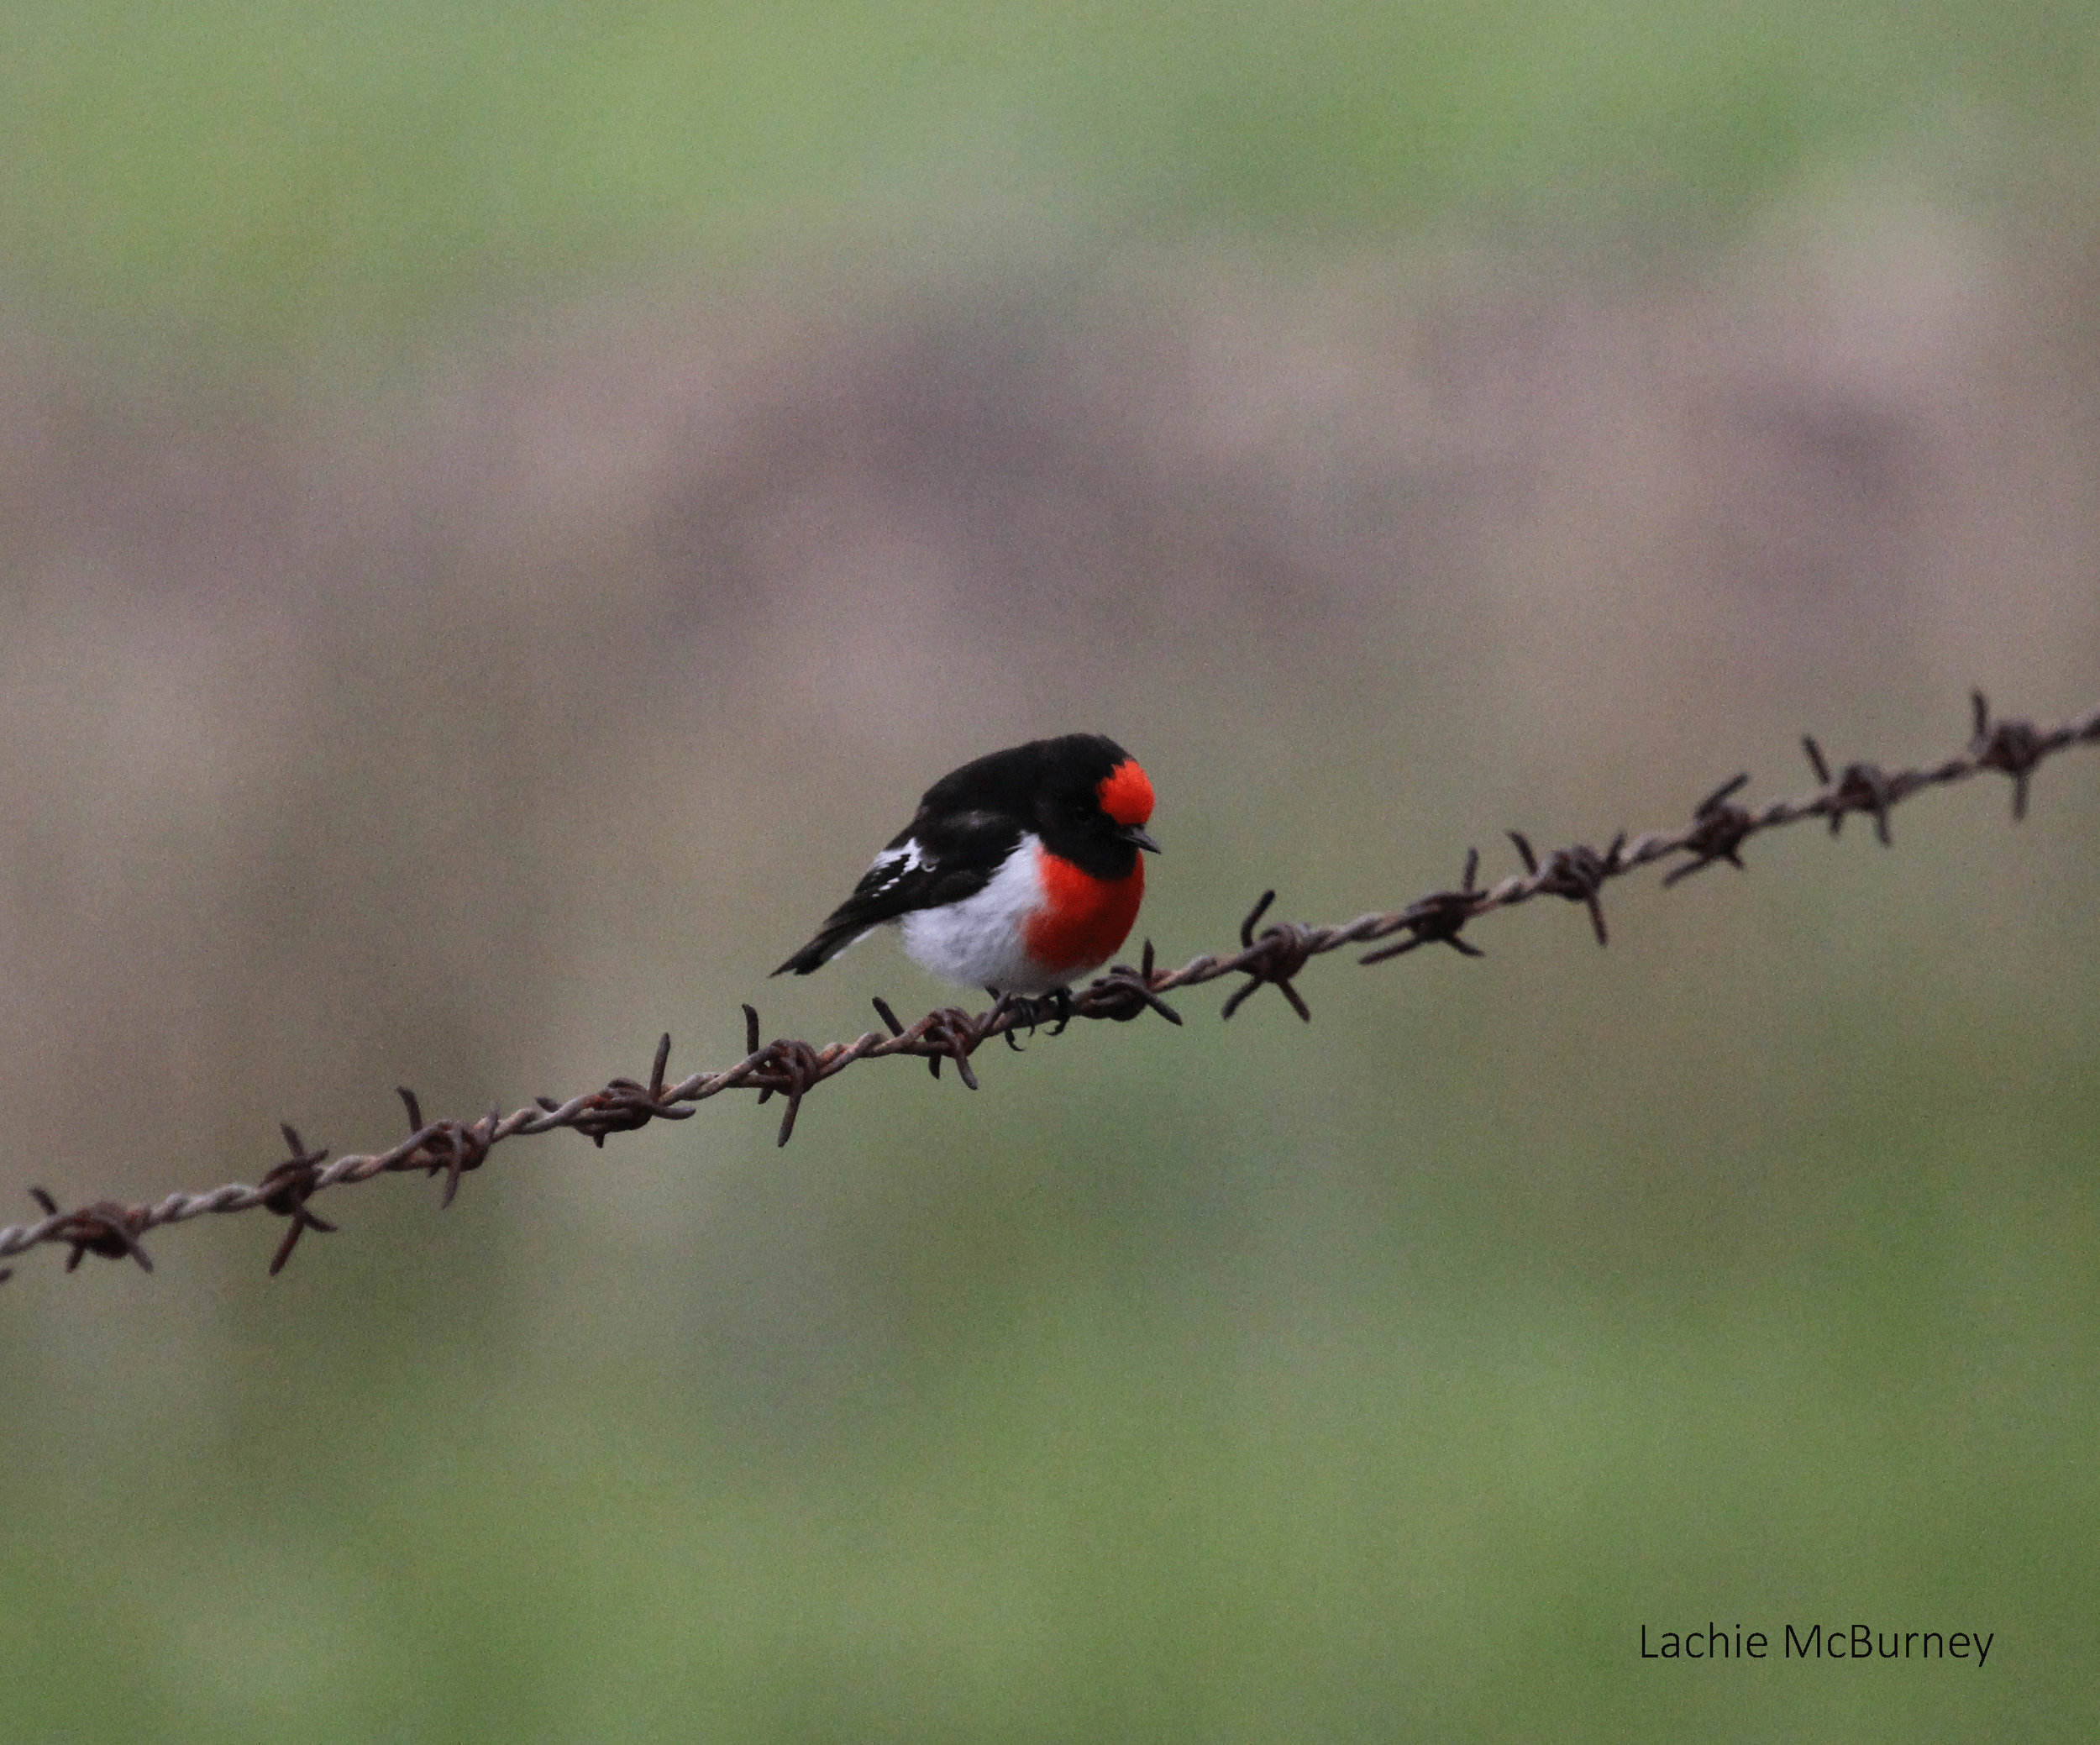   Red-capped Robins are always a delight,&nbsp; added this to an enormous photo collection of “birds on fences”.&nbsp;    Photo: Lachie McBurney.  